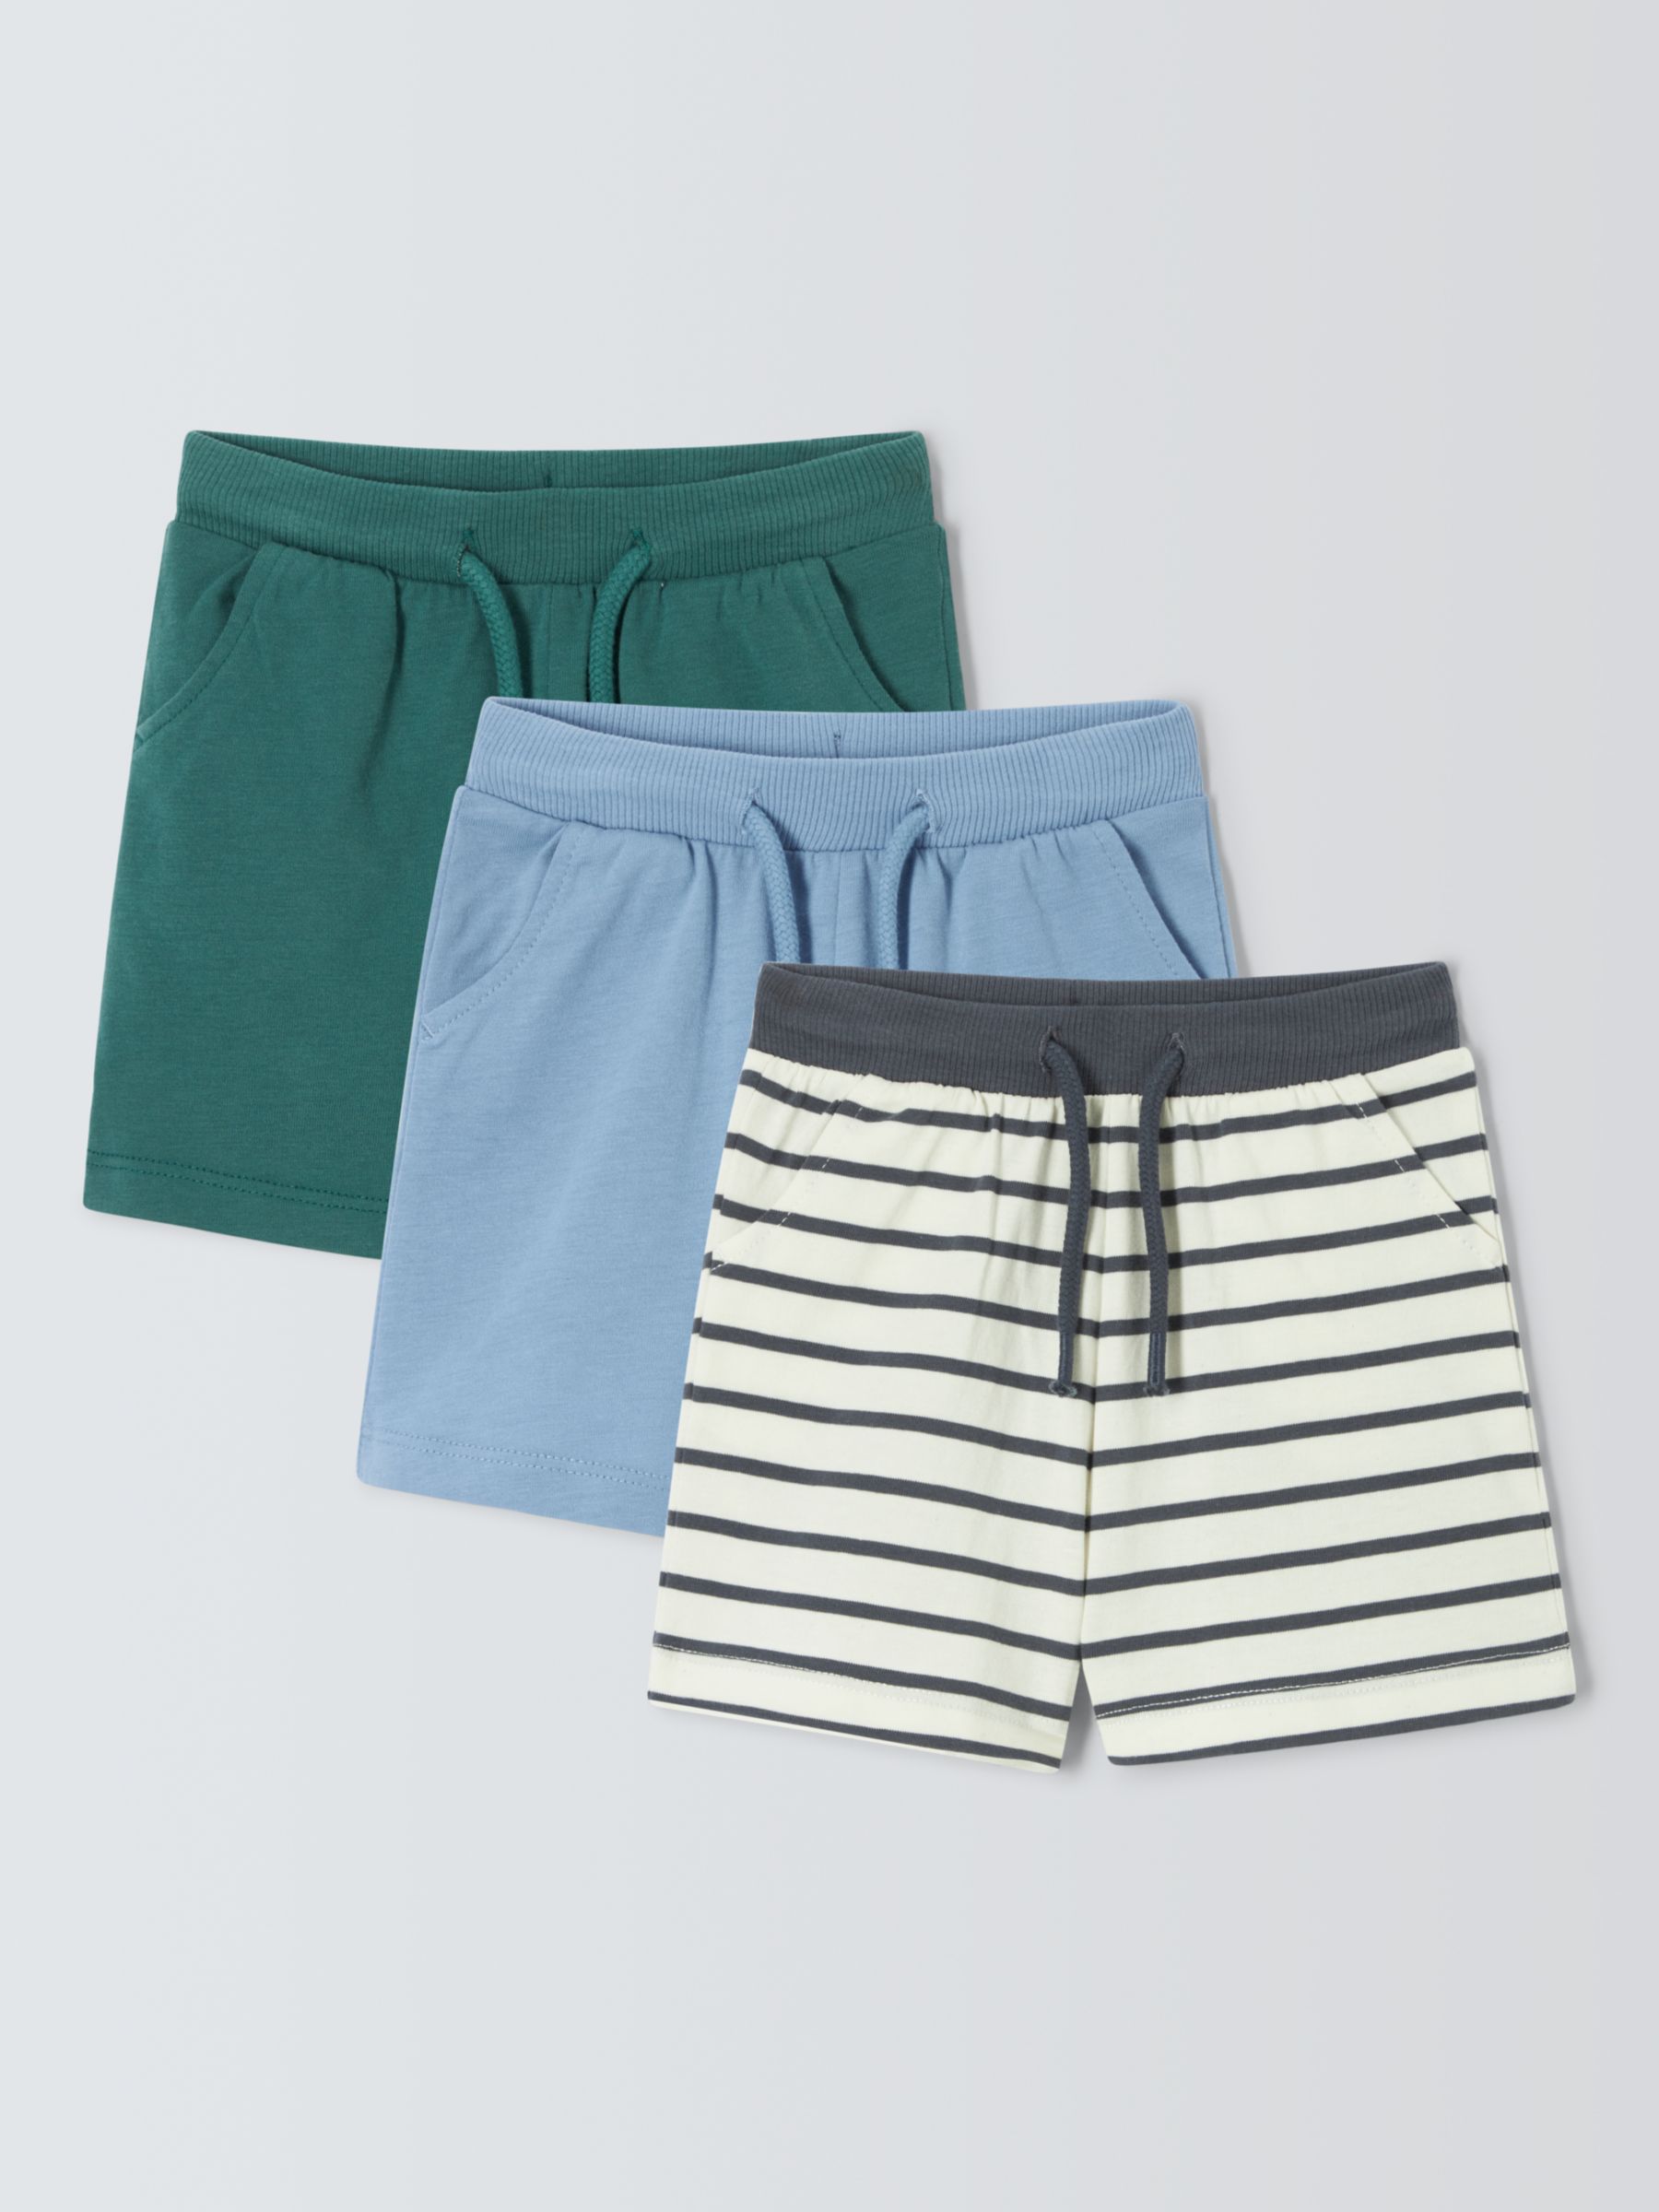 John Lewis Baby Colourblock and Striped Shorts, Pack of 3, Multi, 18-24 months